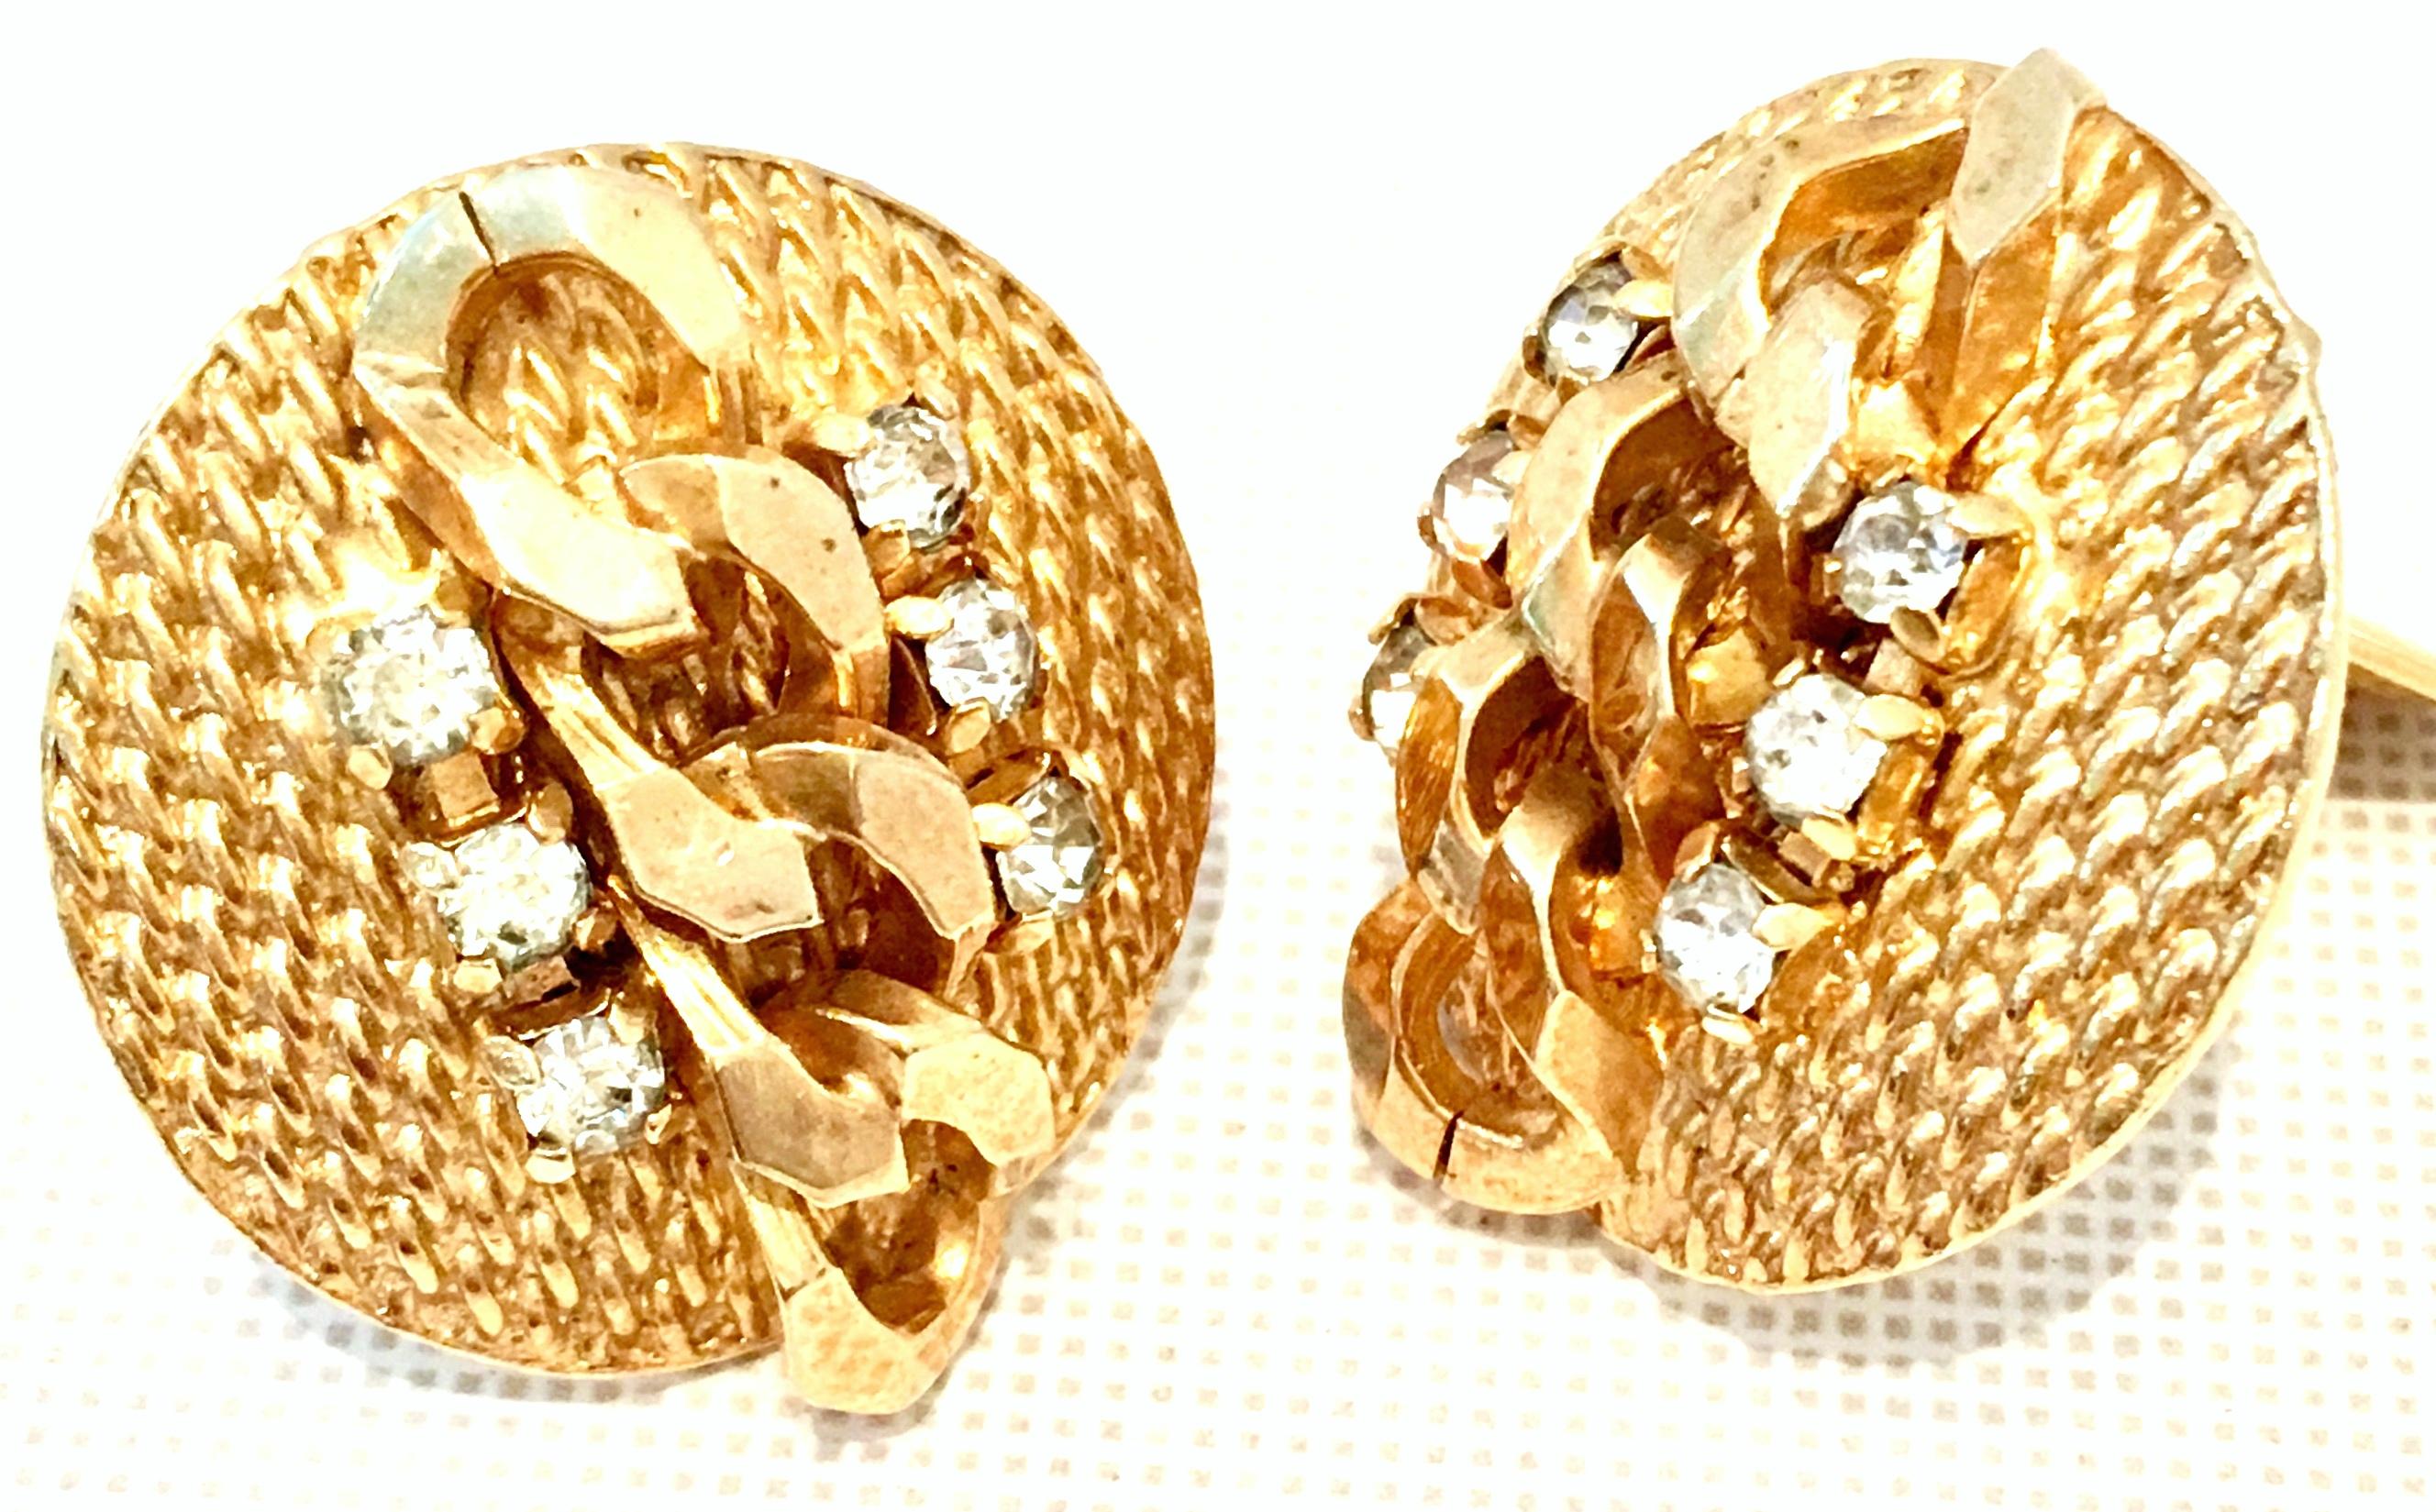 1950'S Classic & Timeless Gold Plate Textured, Braided Swarovski Crystal Earrings By, Jewels By Julio.
Singed one the underside of the clip style earrings, Jewels By Julio.